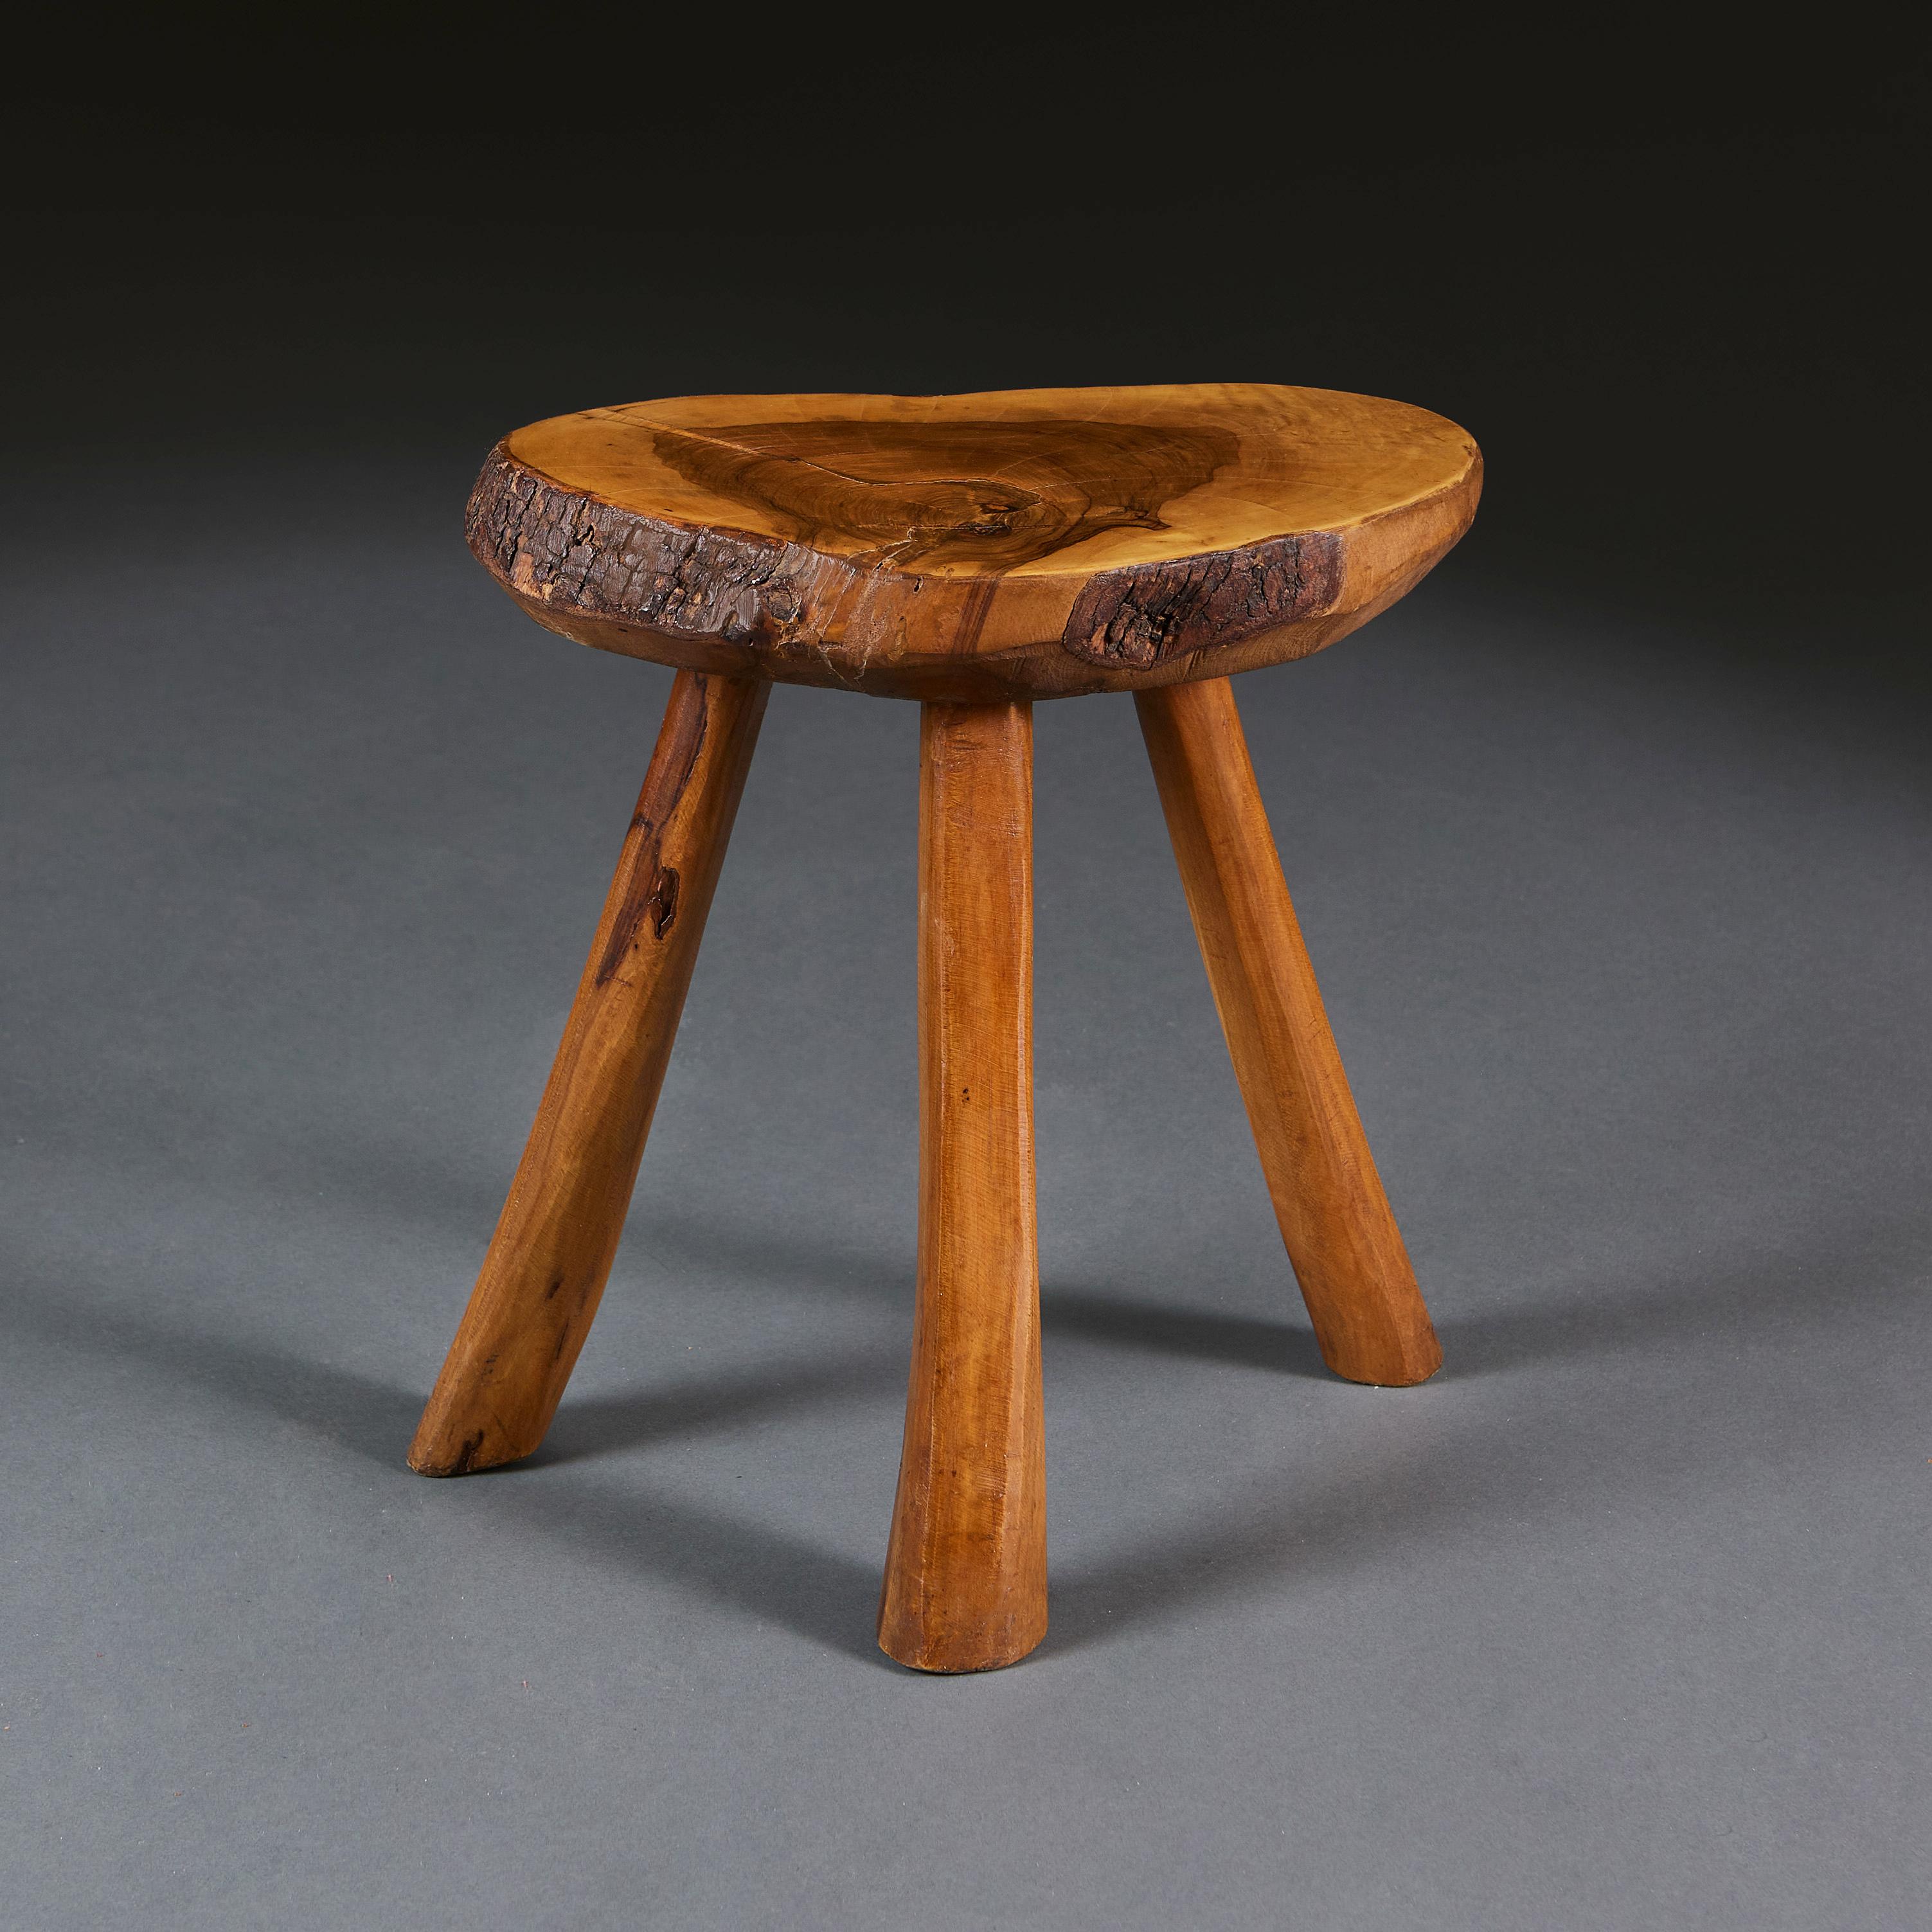 England, circa 1910

An early 20th century elm wood cricket table, the top naturally shaped and with its bark edge, supported on a tripod base with inverted tapering legs.

Height 35.00cm
Width 36.00cm
Depth 26.00cm.